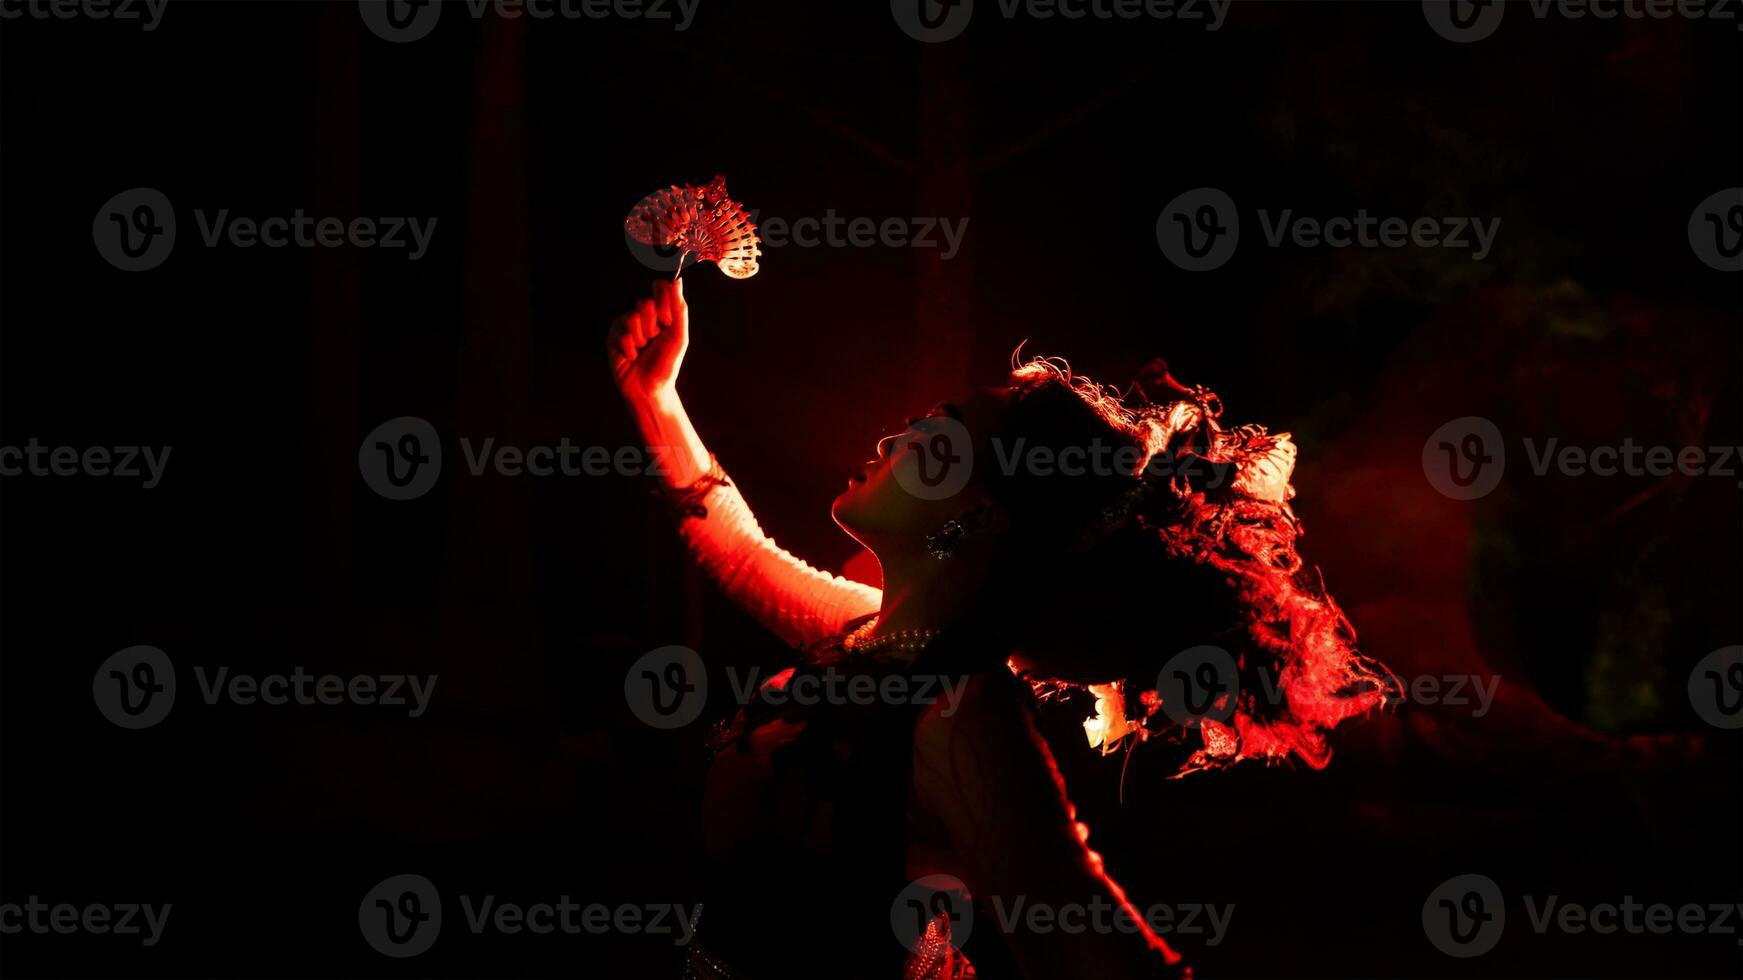 the silhouette of a female dancer holding jewelry that looks like a reflection reflecting in the dim light photo